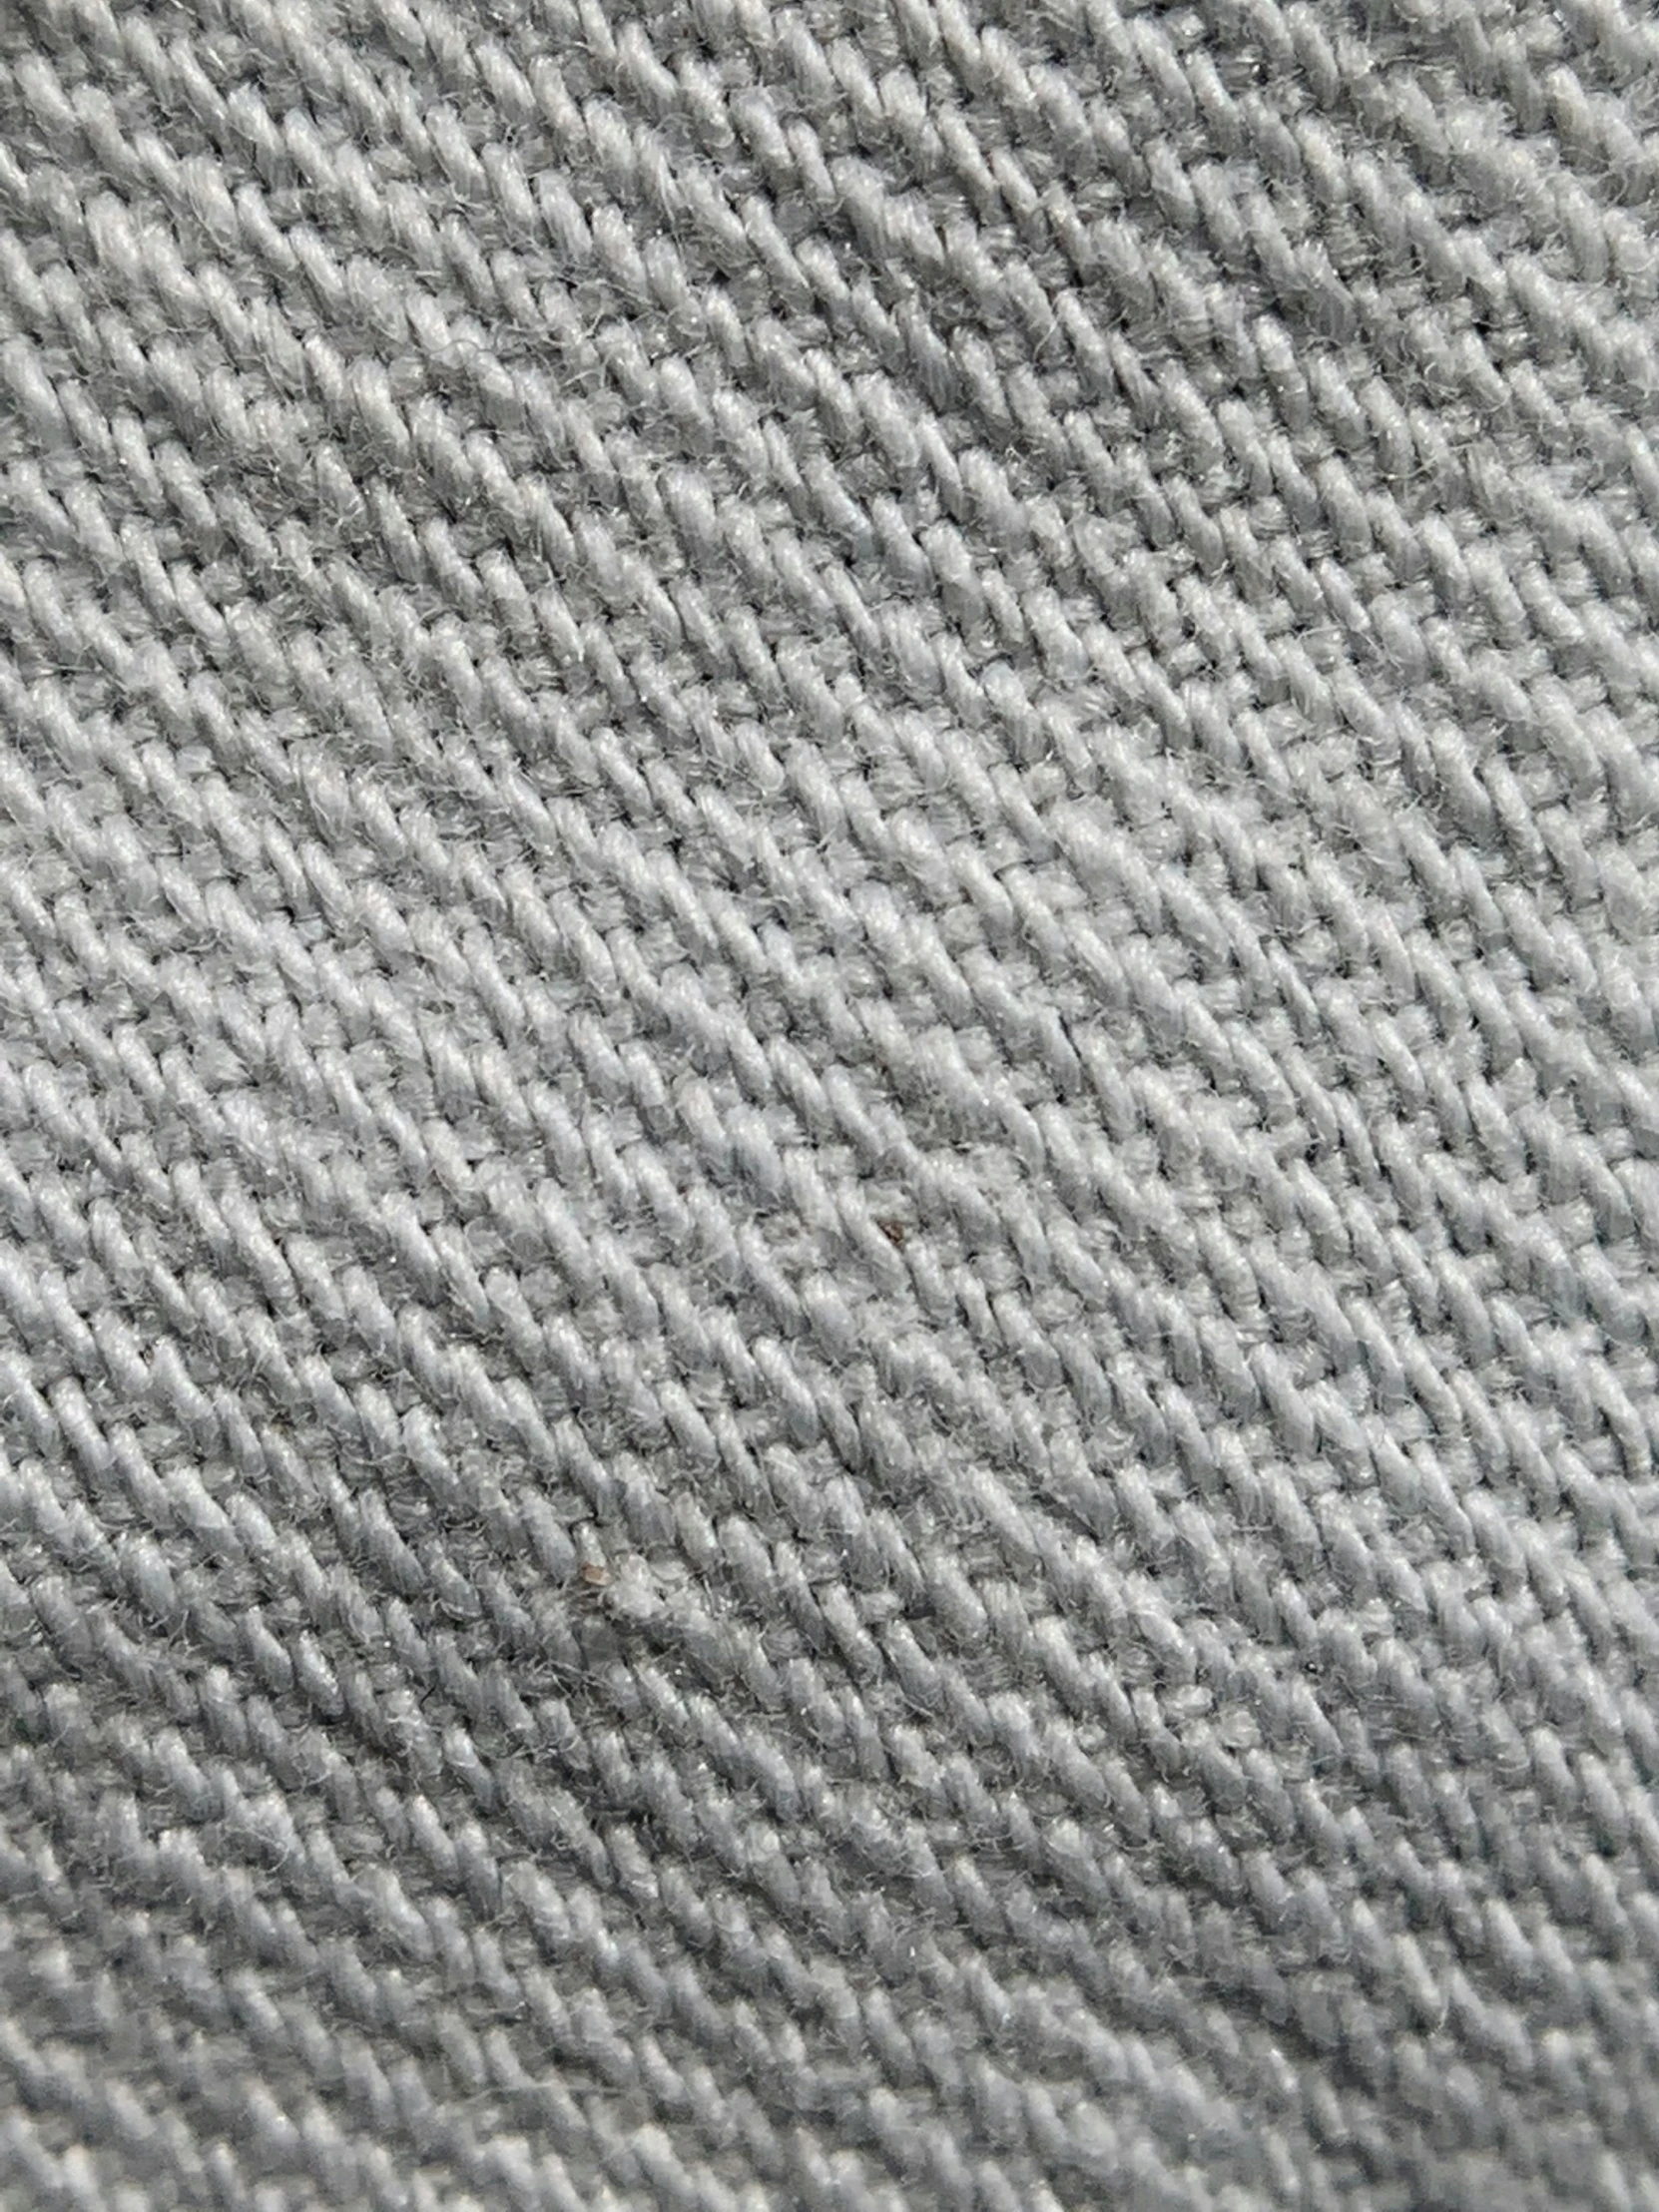 an up close view of the material with some tiny holes